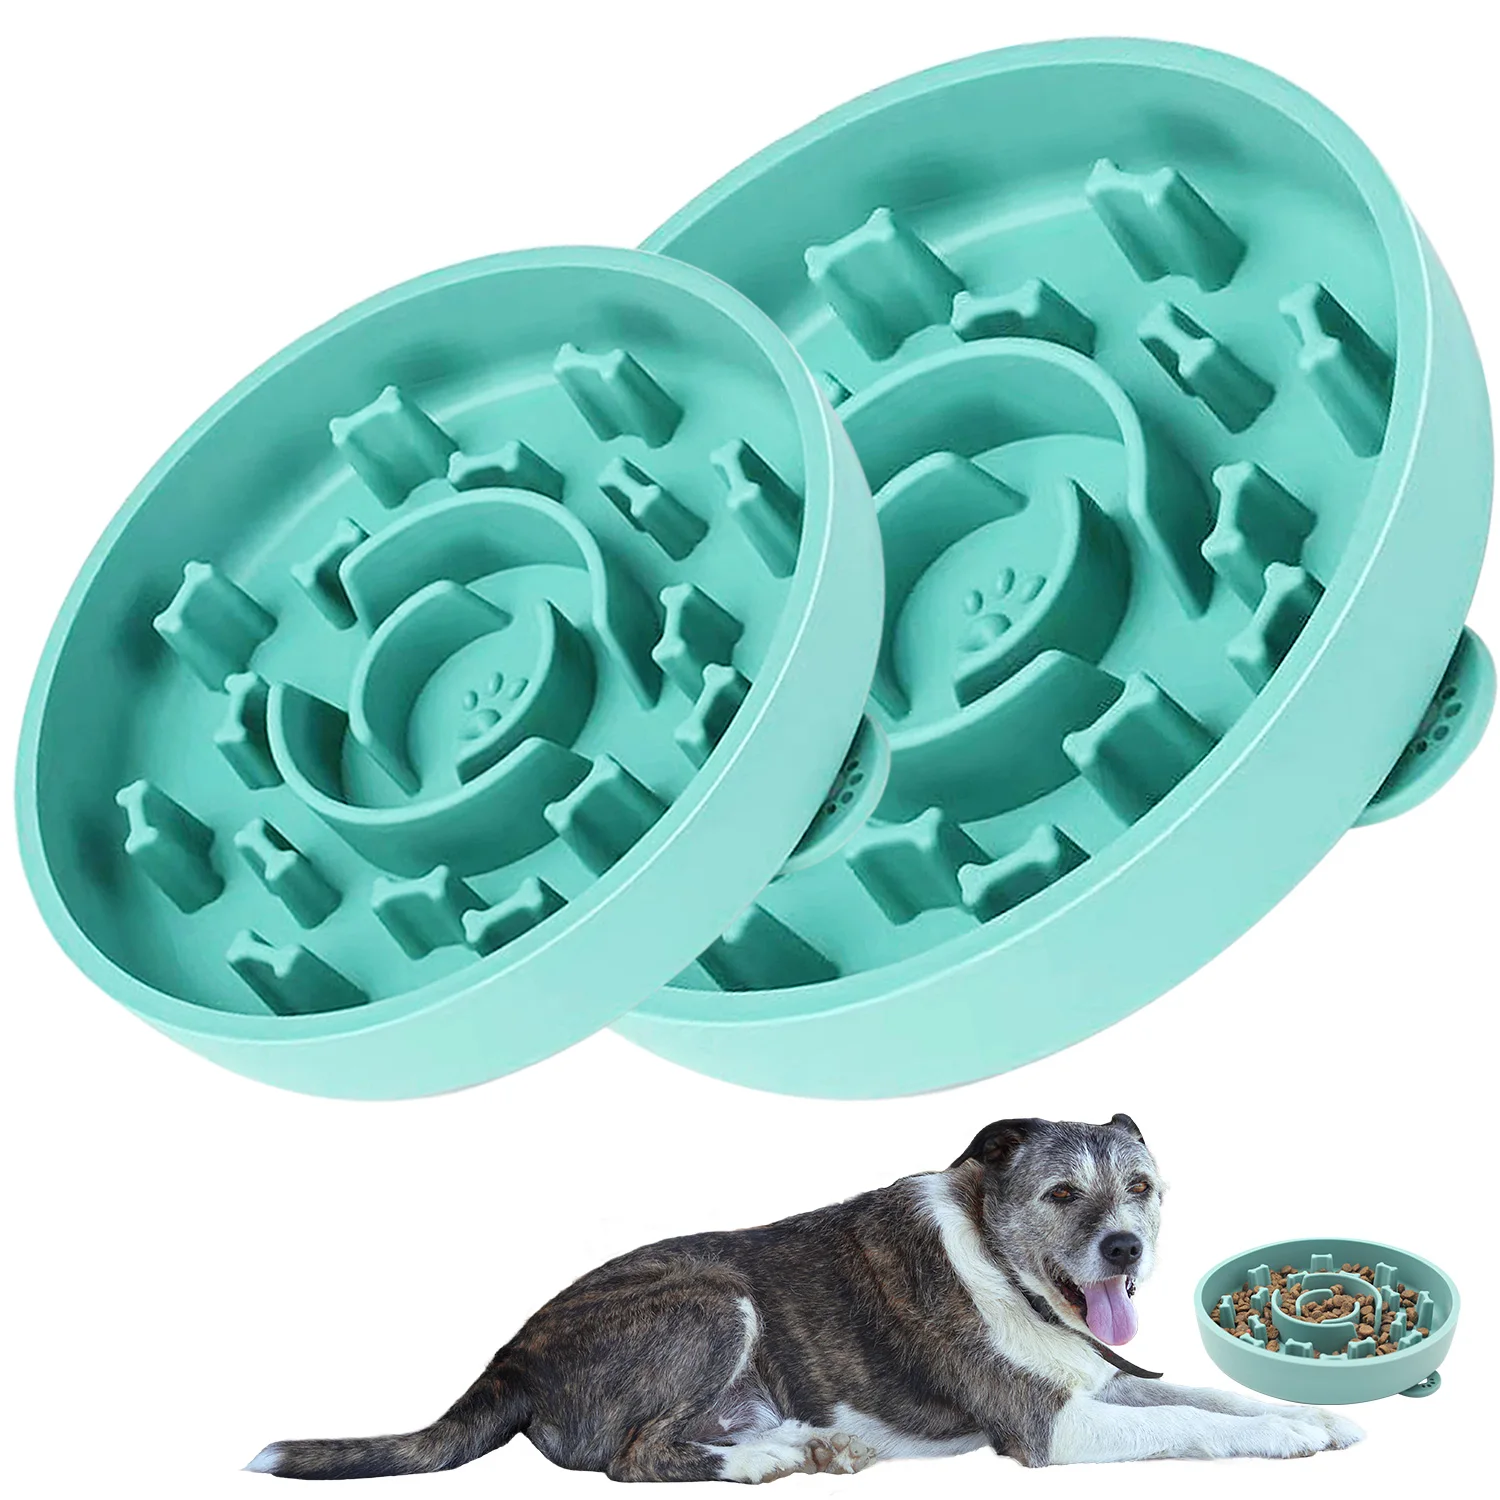 

Dog Slow Feeder Licking Food Slow Eating Bowl Cat Anti-choke Food Bowl Suction Cup Silicone Mat Plate Prevent Obesity Pet Dishes